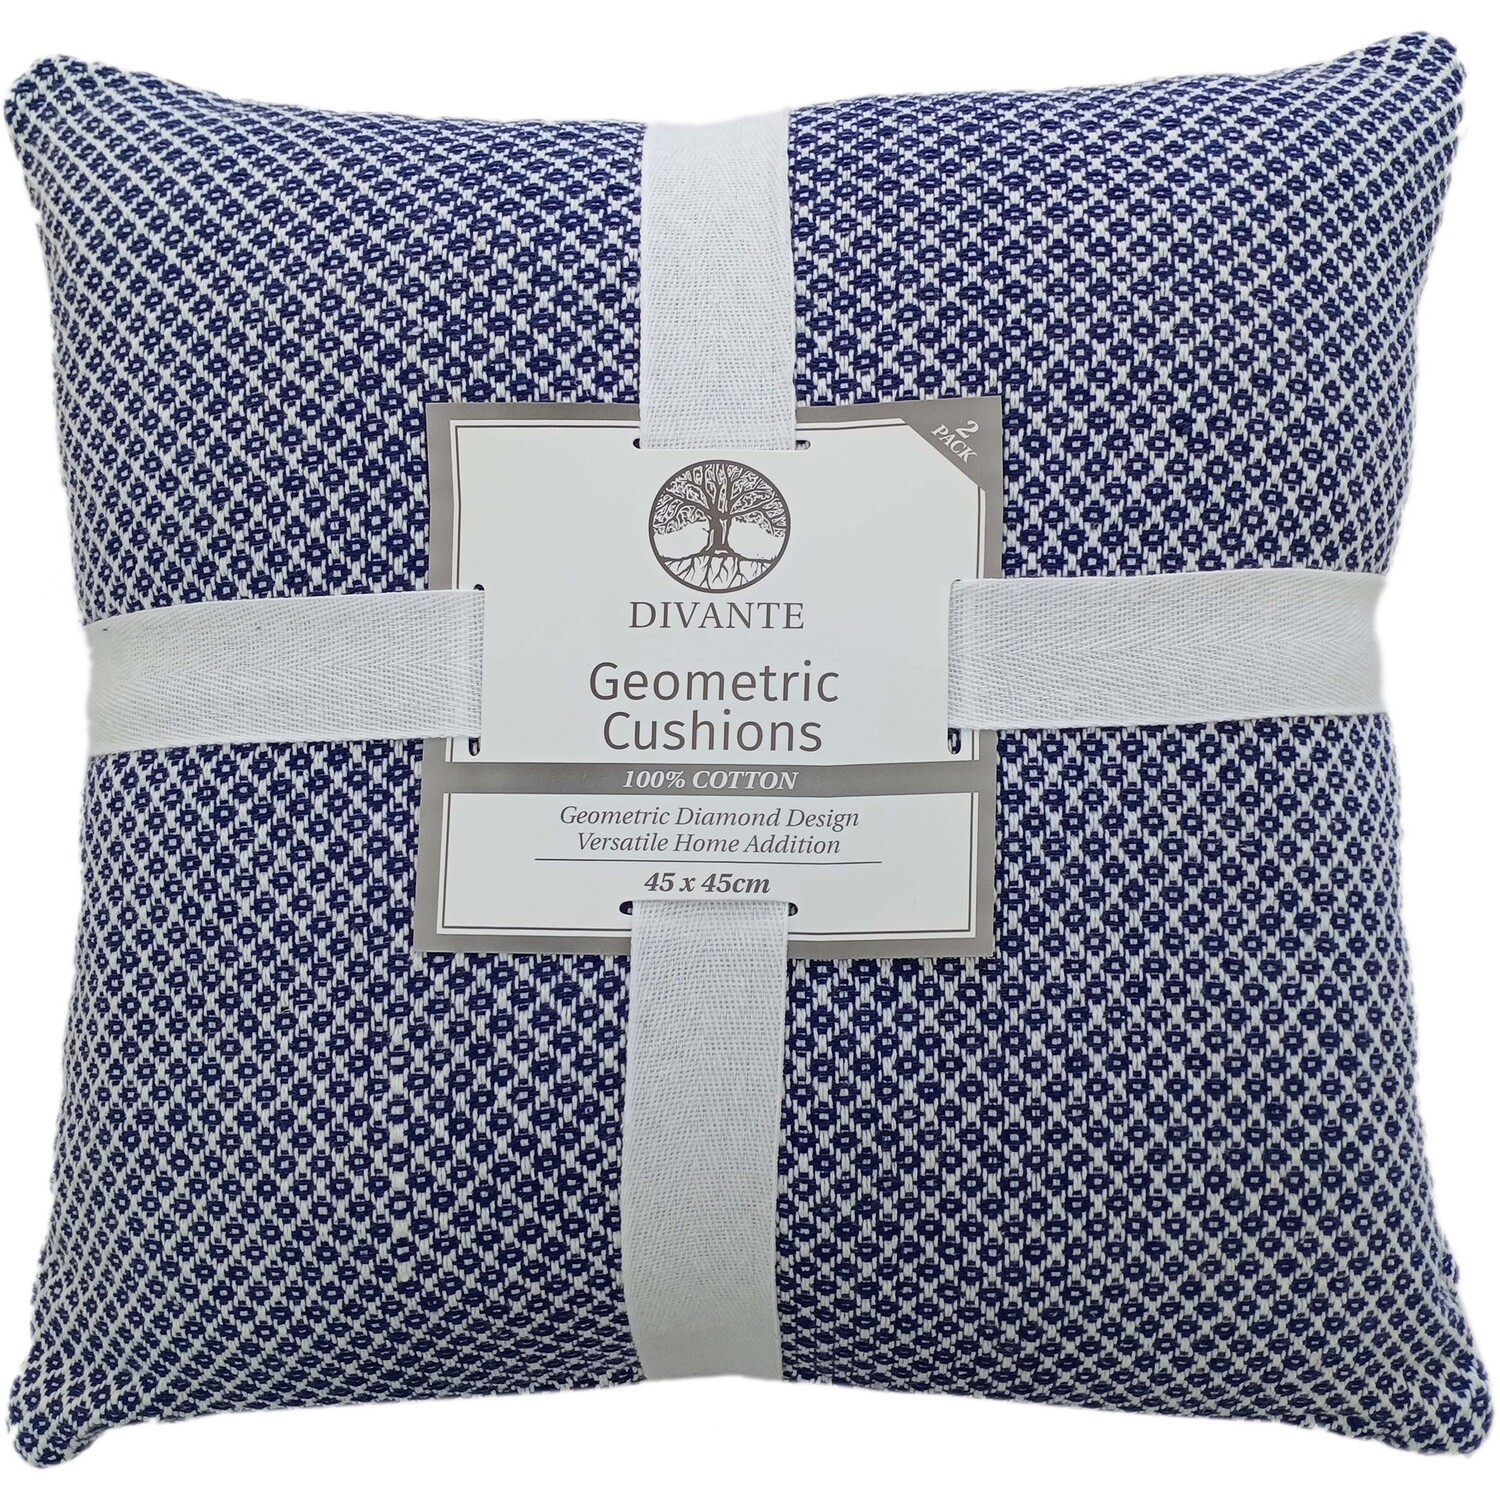 Pack of 2 Geometric Cushions - Navy Image 1